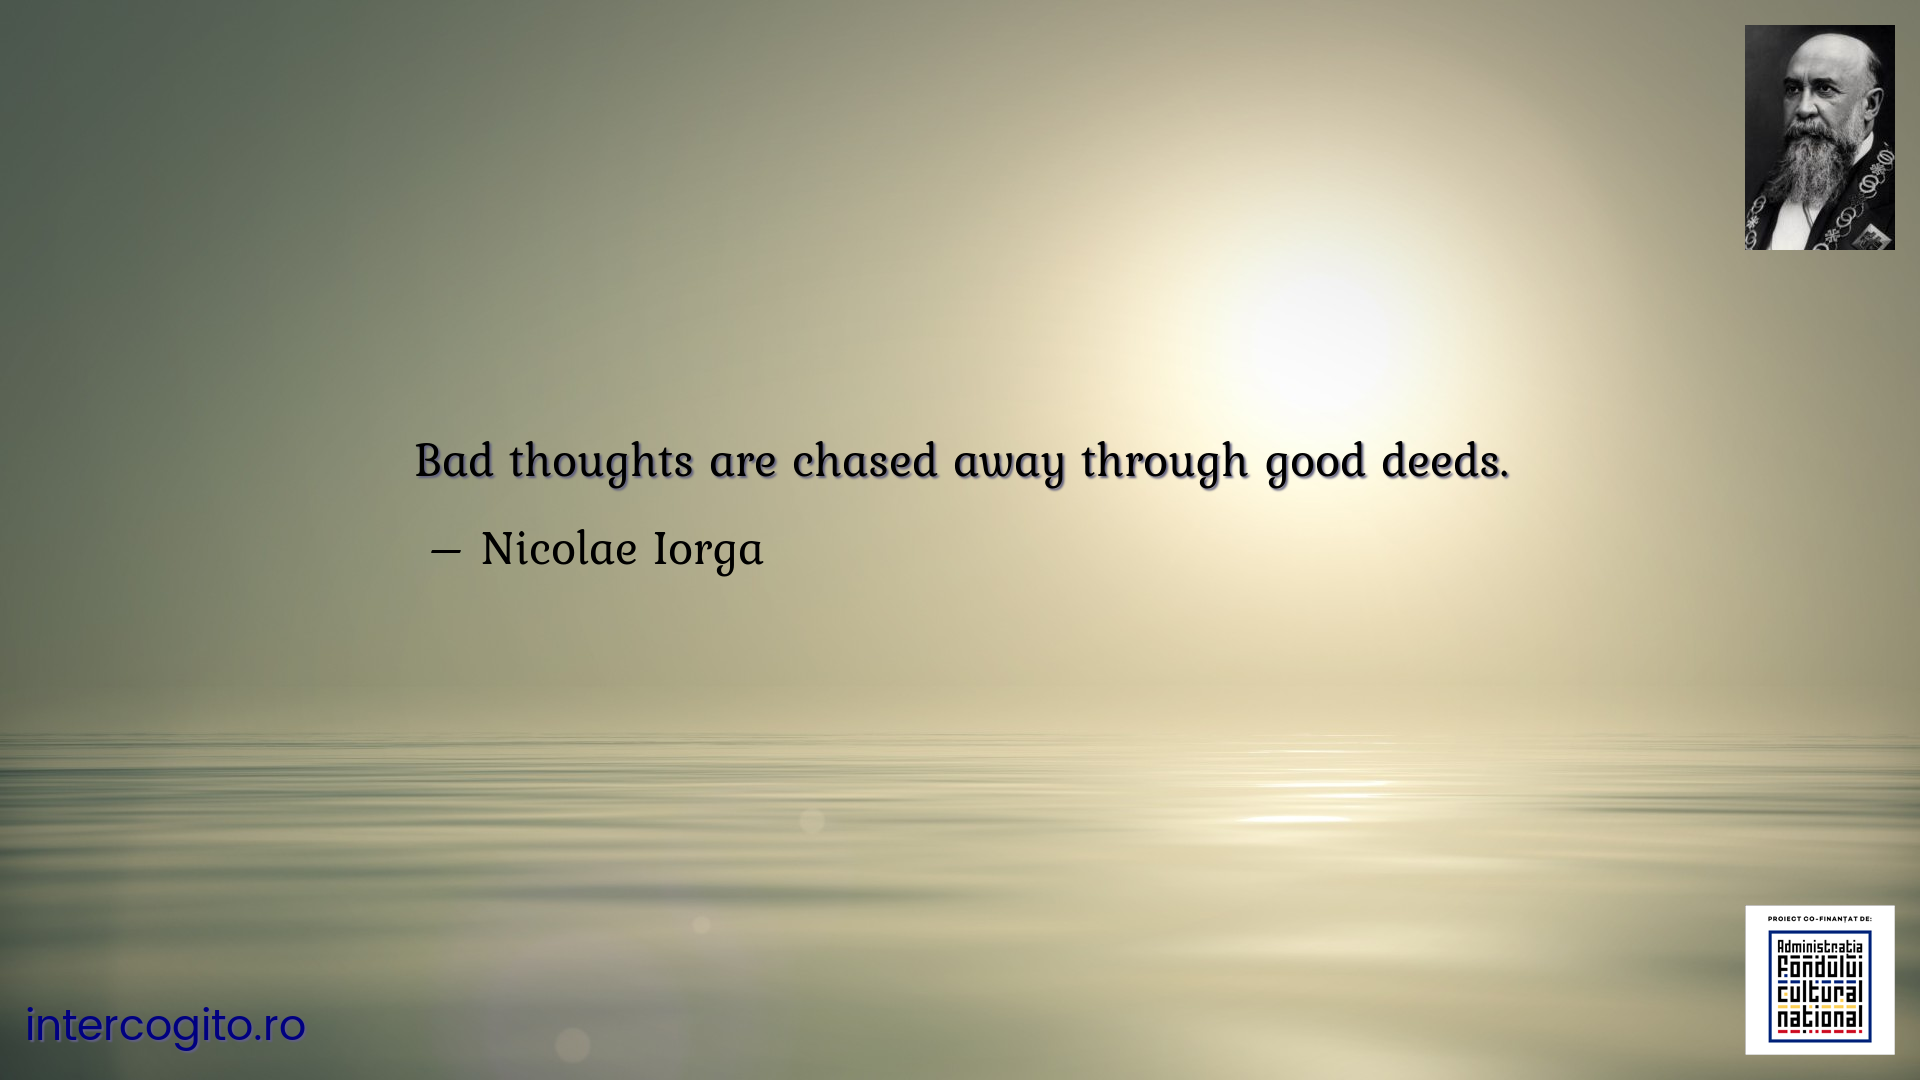 Bad thoughts are chased away through good deeds.